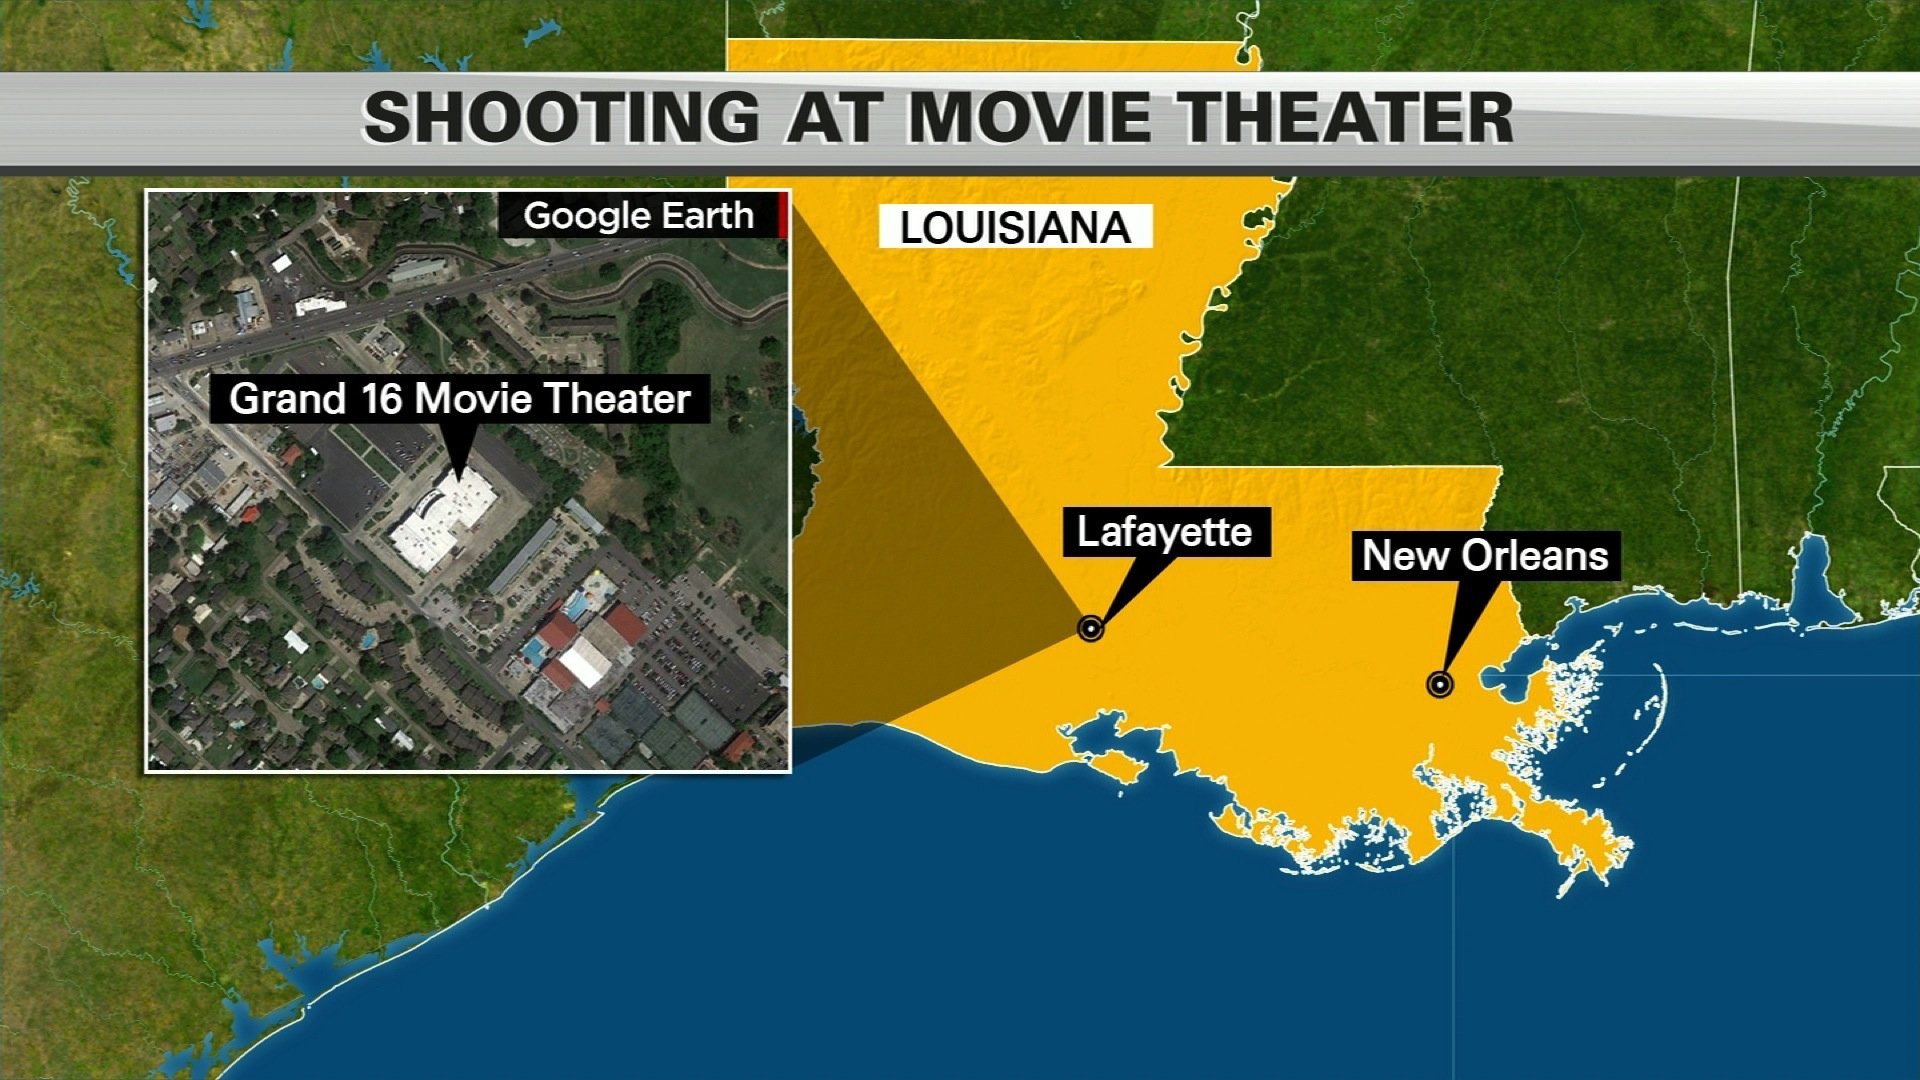 A shooting at a Lafayette, Louisiana, movie theater left at least three people dead, including the shooter, and 7 others injured, according to health officials. Police in Lafayette, Louisiana, say they responded Thursday, July 23, 2015 night to a report of a shooting at the Grand 16 Theatre. This is an image of the map of where the shooting incident took place.